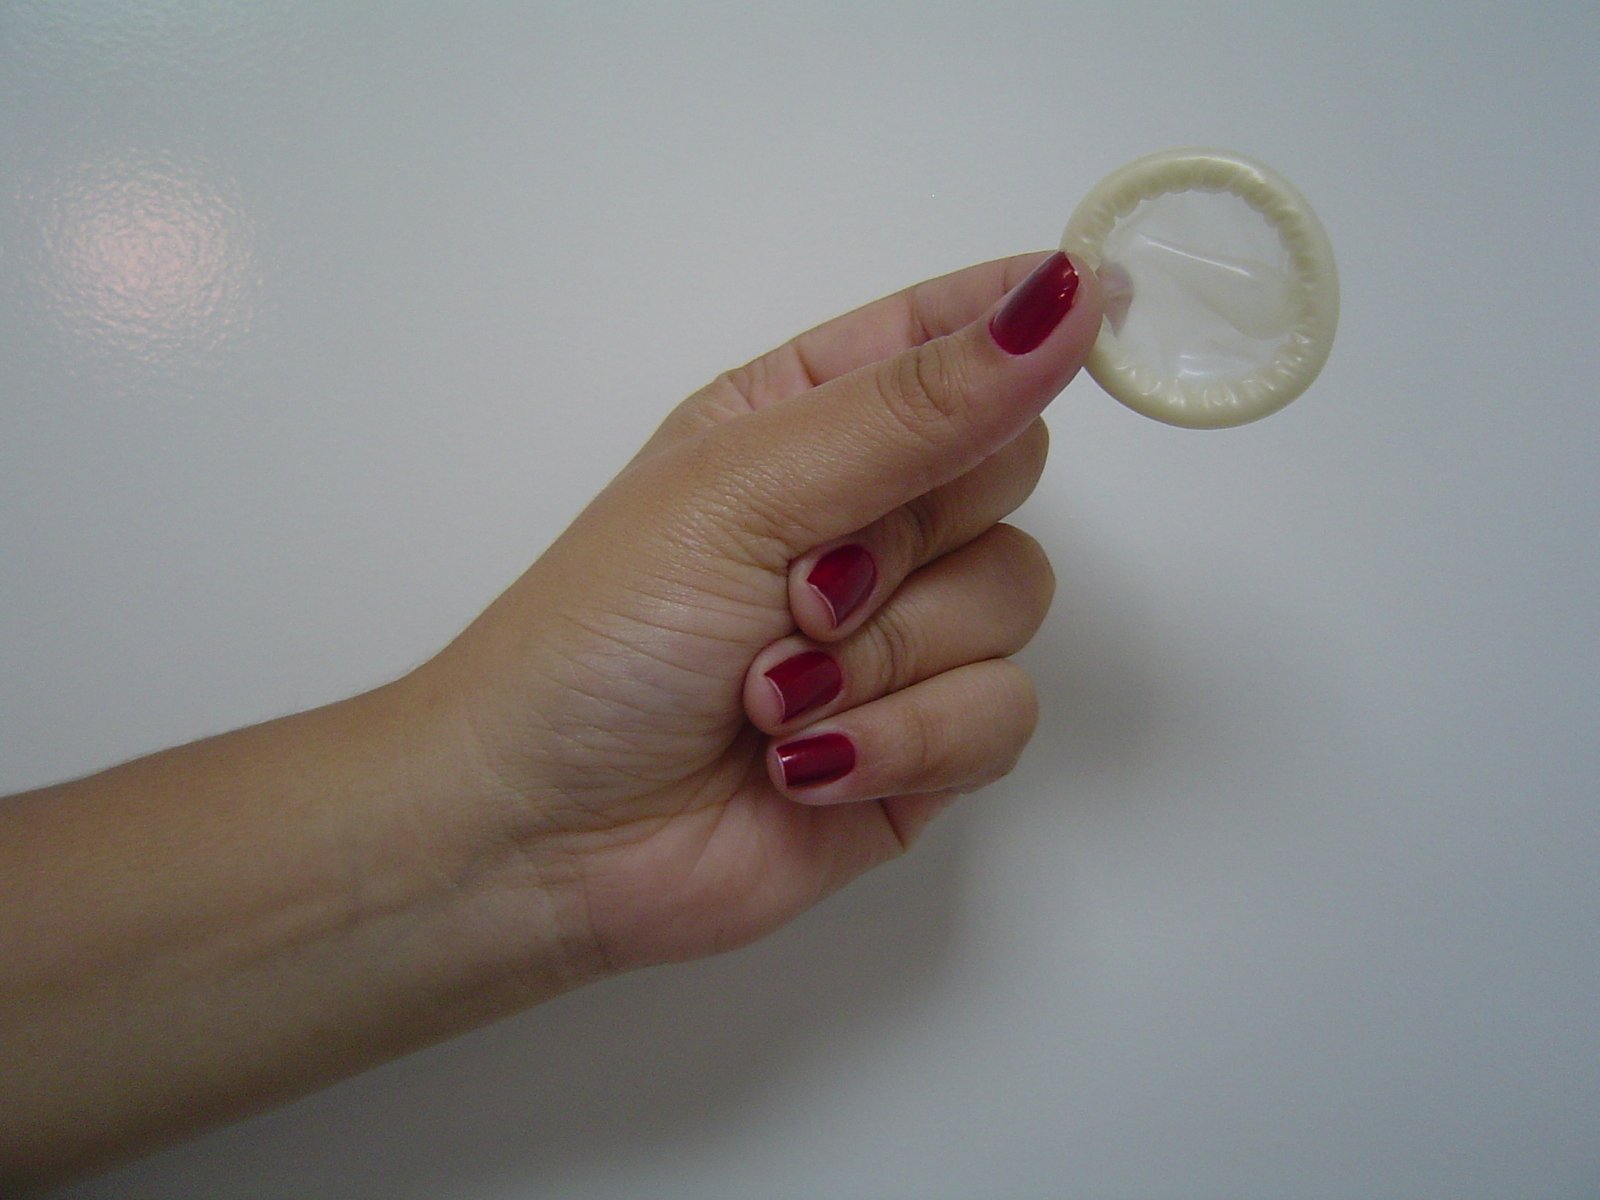 a white table with some hand holding a round object